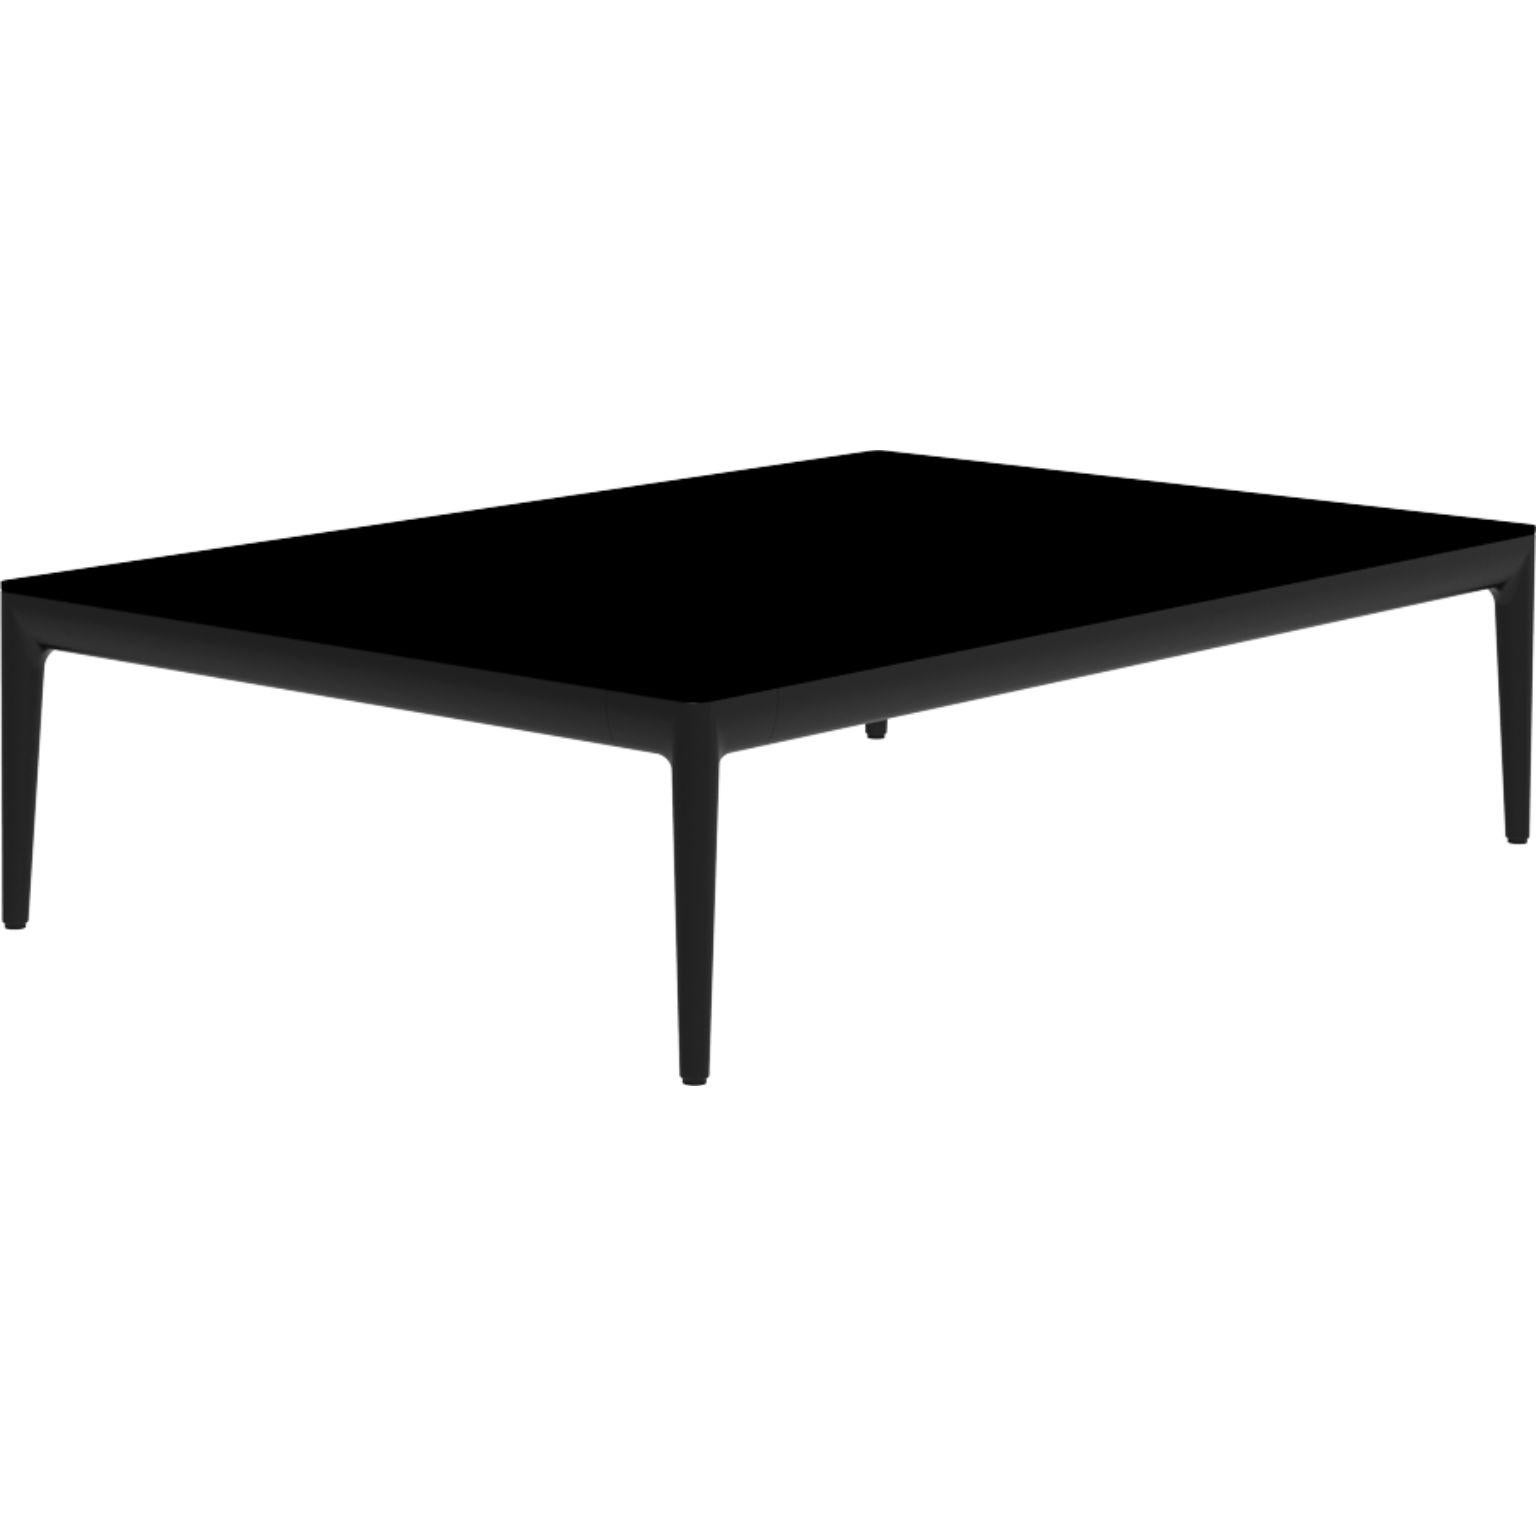 Ribbons black 115 coffee table by MOWEE
Dimensions: D 76 x W 115 x H 29 cm
Material: Aluminum and HPL top.
Weight: 14.5 kg.
Also available in different colors and finishes. (HPL Black Edge or Neolith top).

An unmistakable collection for its